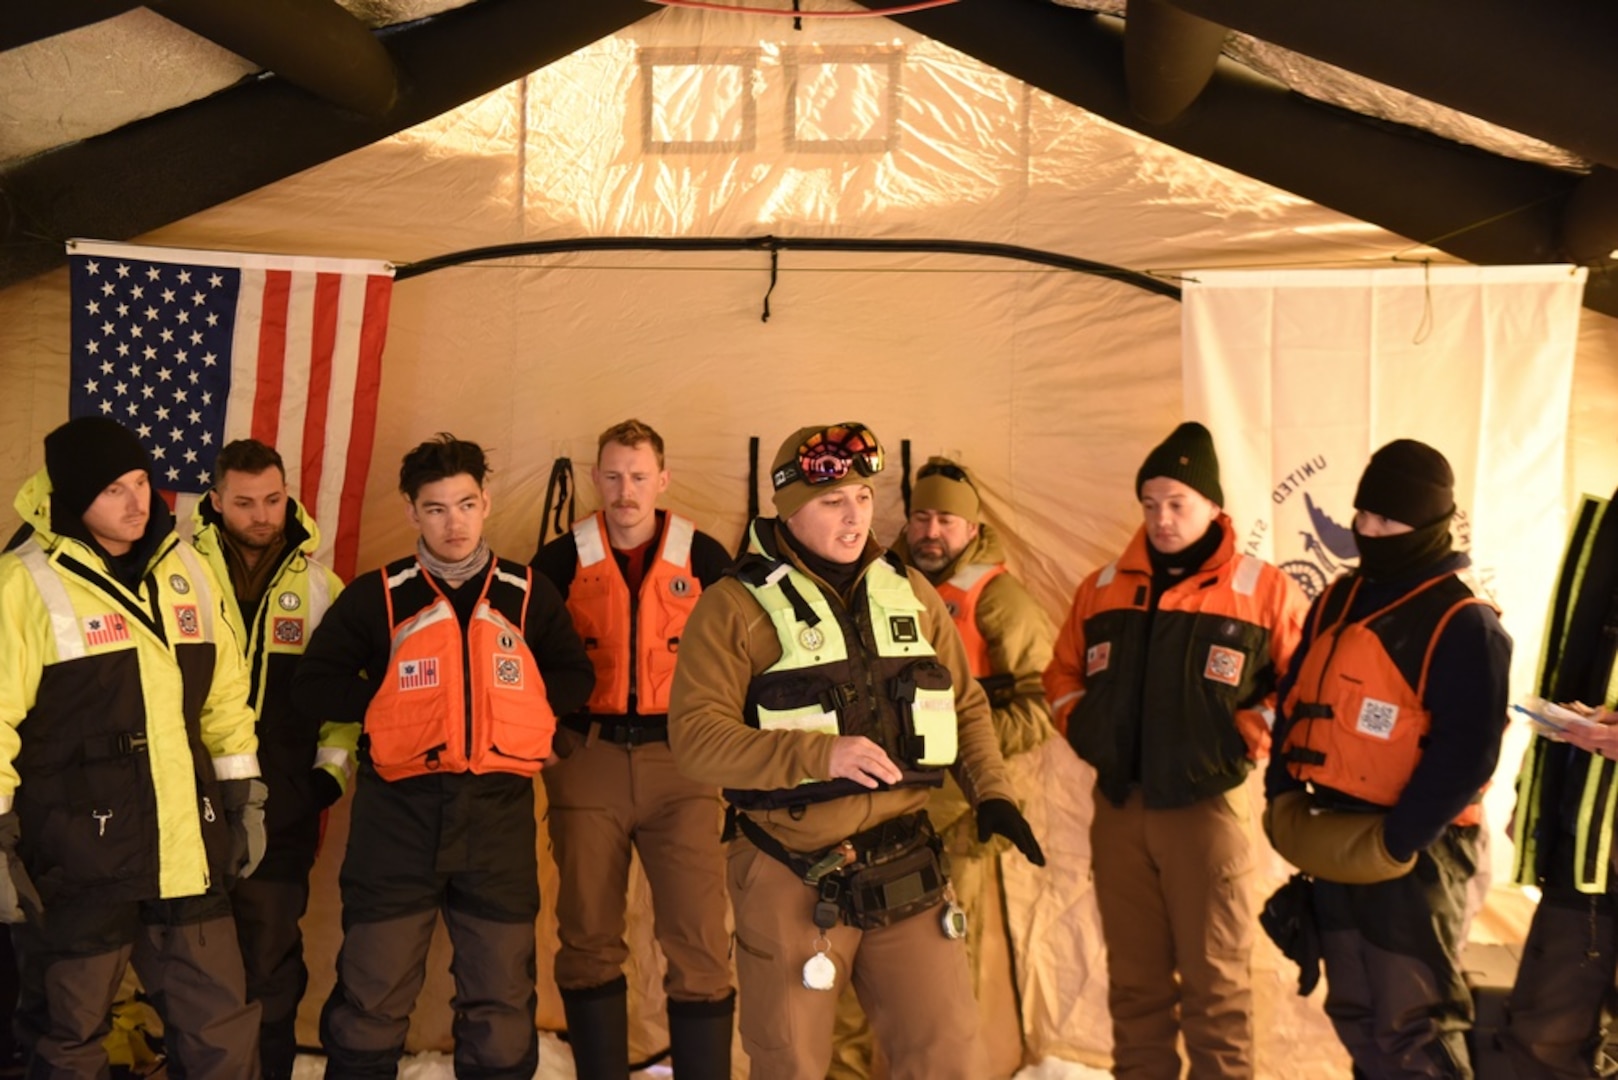 U.S. Coast Guard Petty Officer 1st Class Joshua Bredesen, an instructor at the Cold Water Ice Diving course, explains the ice diving exercise to the dive students on Ferrel Lake at Camp Ripley, Minnesota, Feb. 3, 2022. The two week course is considered a special training for ice diving after attending Coast Guard Diver A-School. (U.S. Coast Guard photo by Petty Officer 3rd Class Omar Faba)